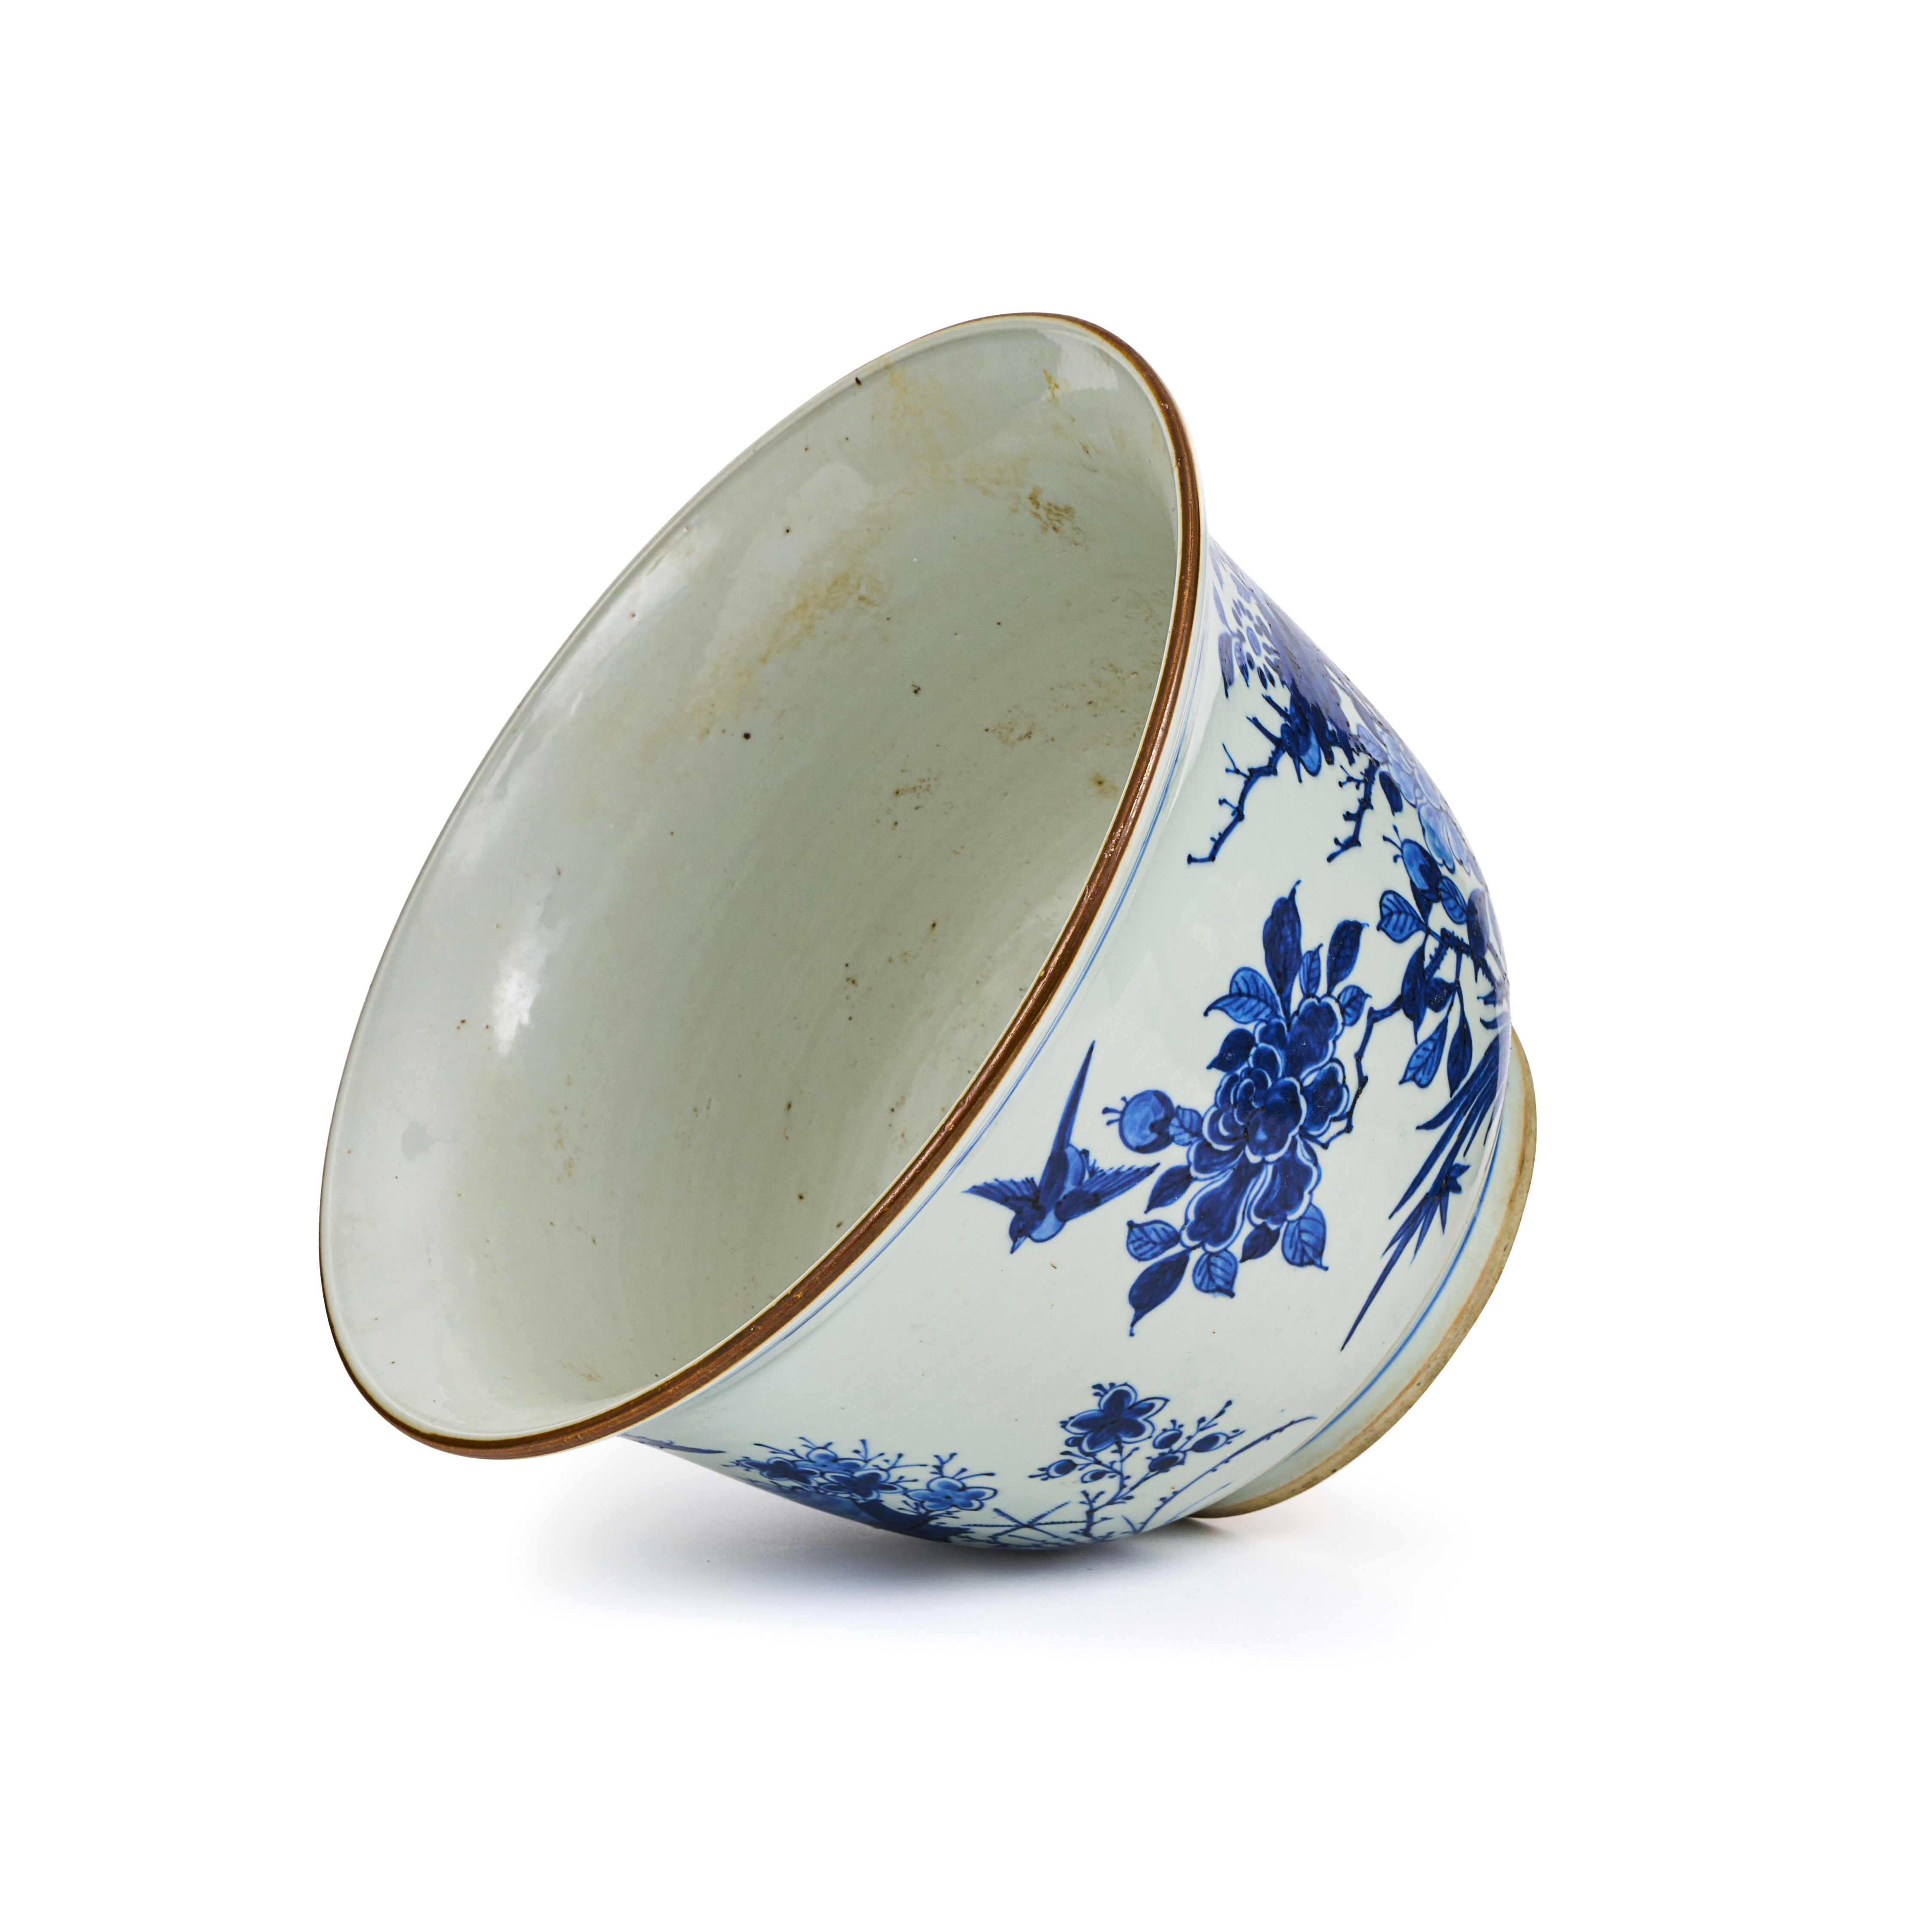 A CHINESE BLUE & WHITE FLORAL MAGPIE JARDINIERE, QING DYNASTY (1644-1911) - Image 3 of 4